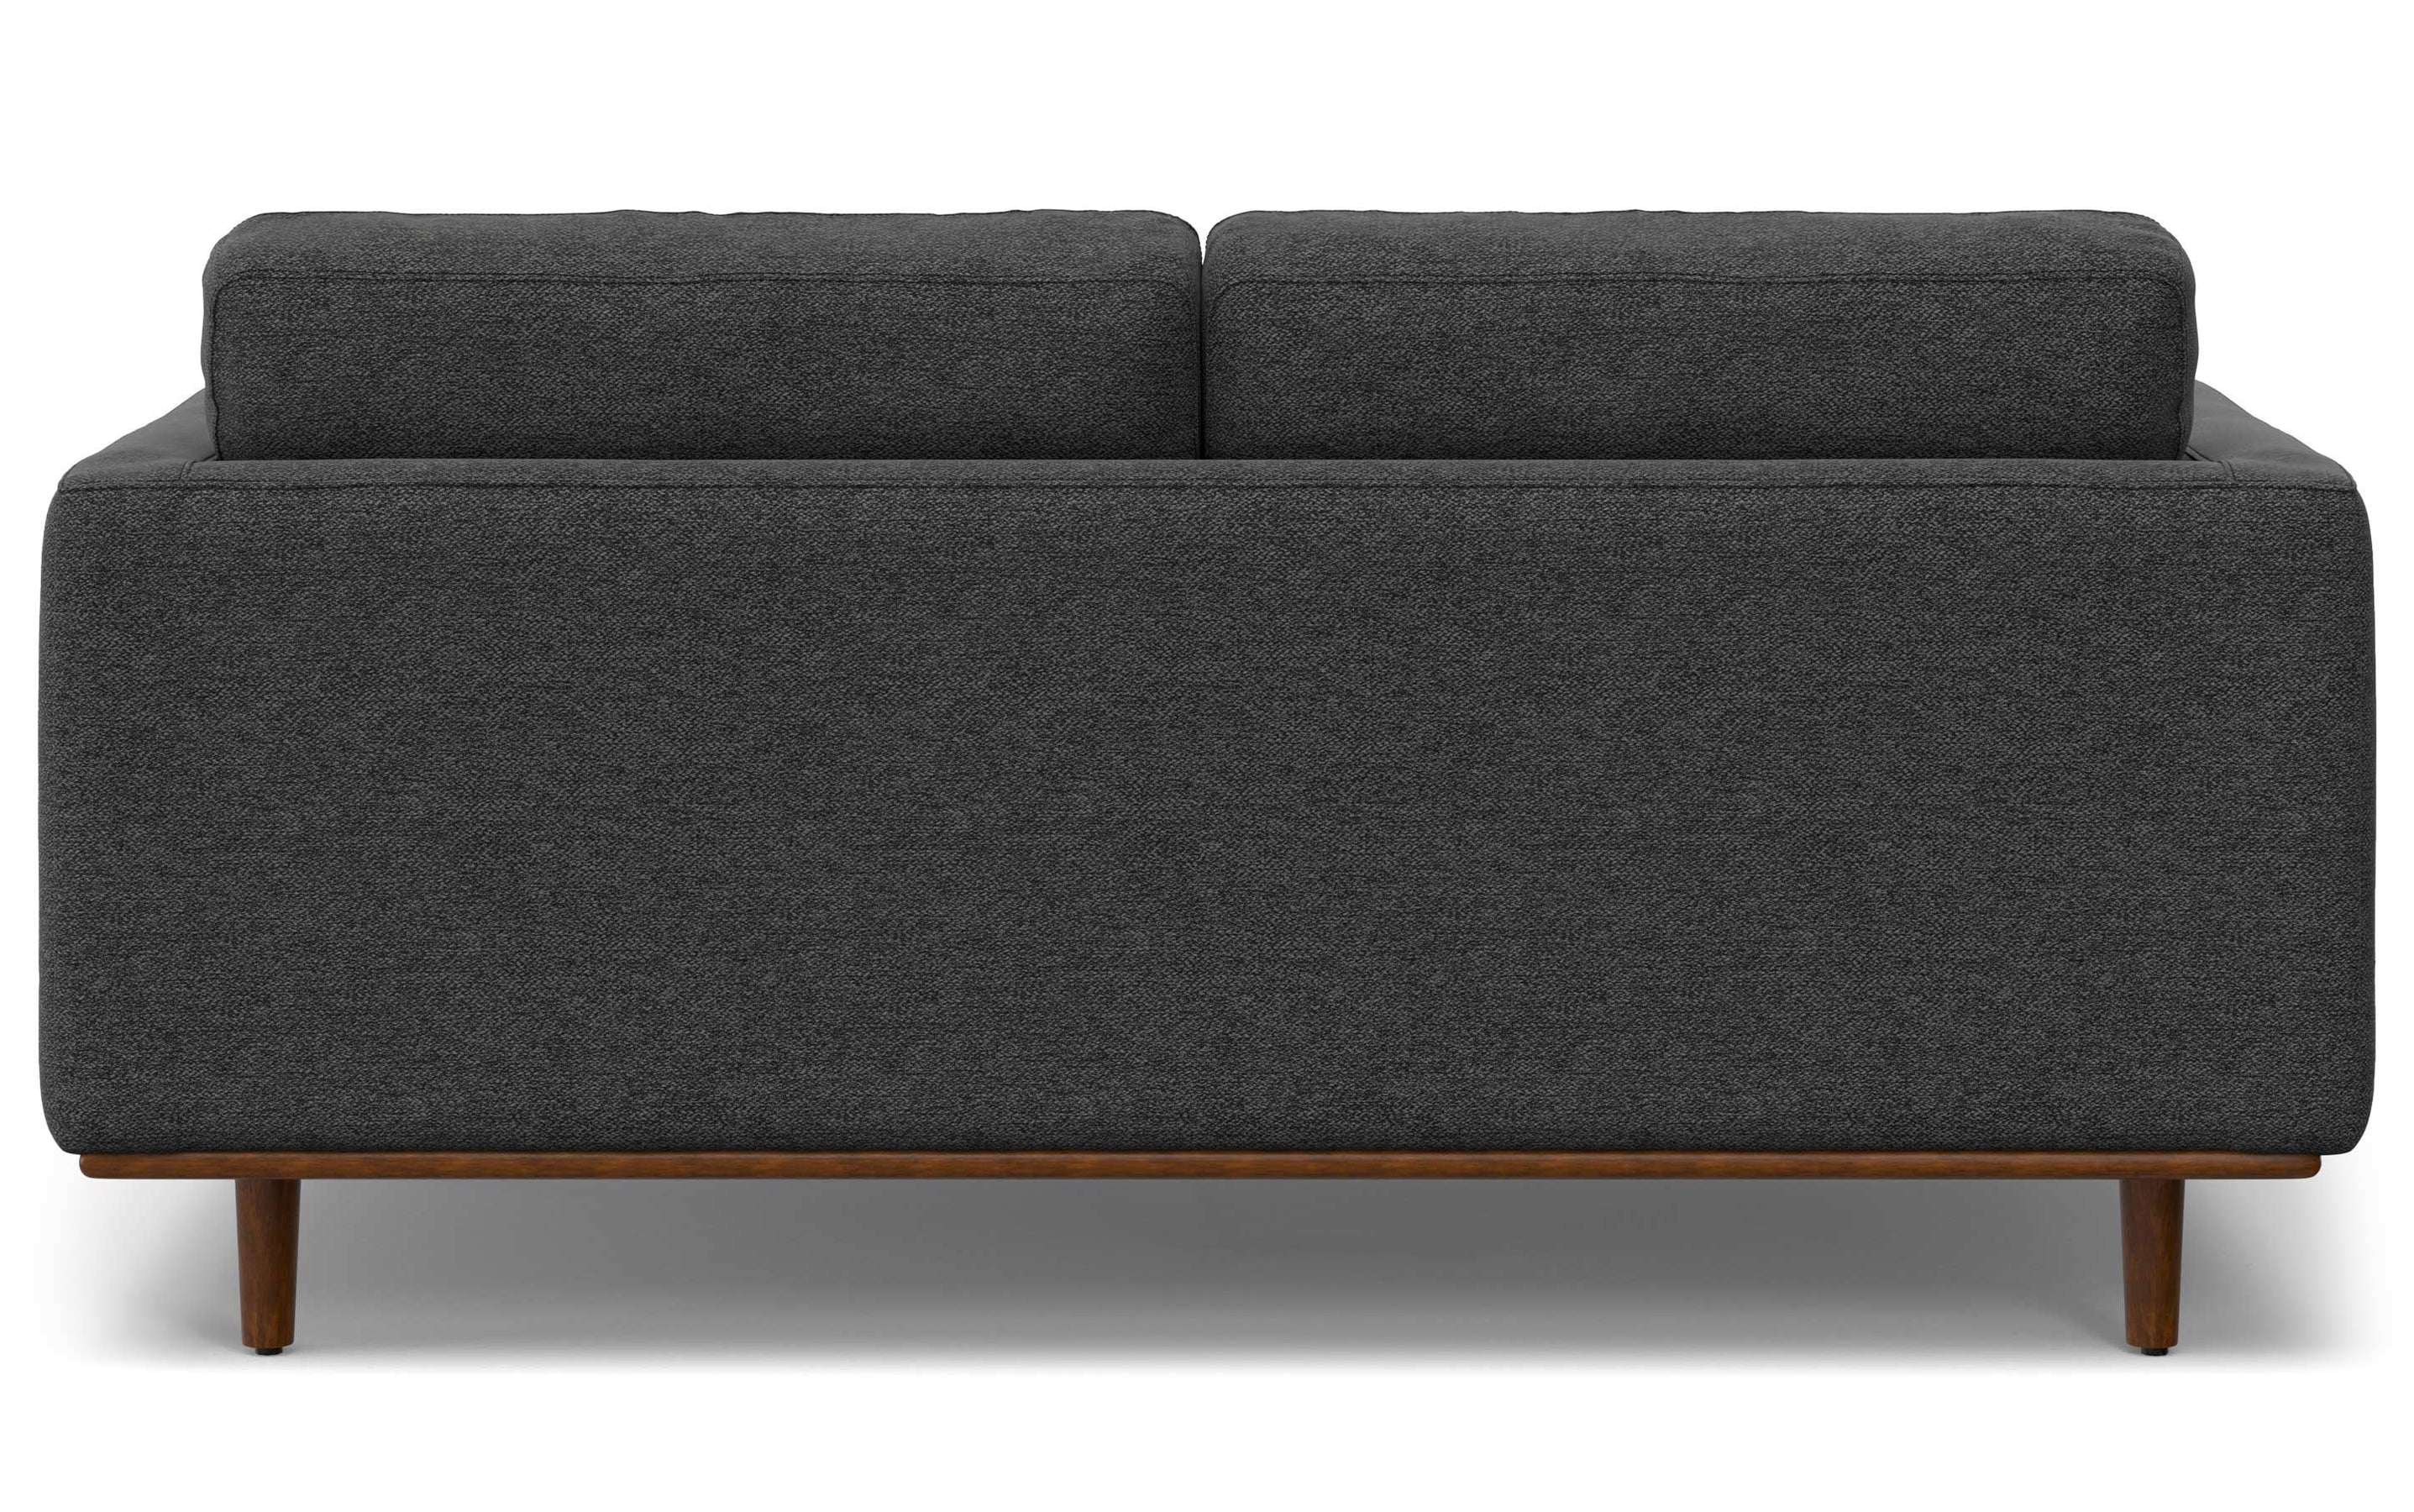 Charcoal Grey Woven-Blend Fabric | Morrison 72-inch Sofa and Ottoman Set in Woven-Blend Fabric